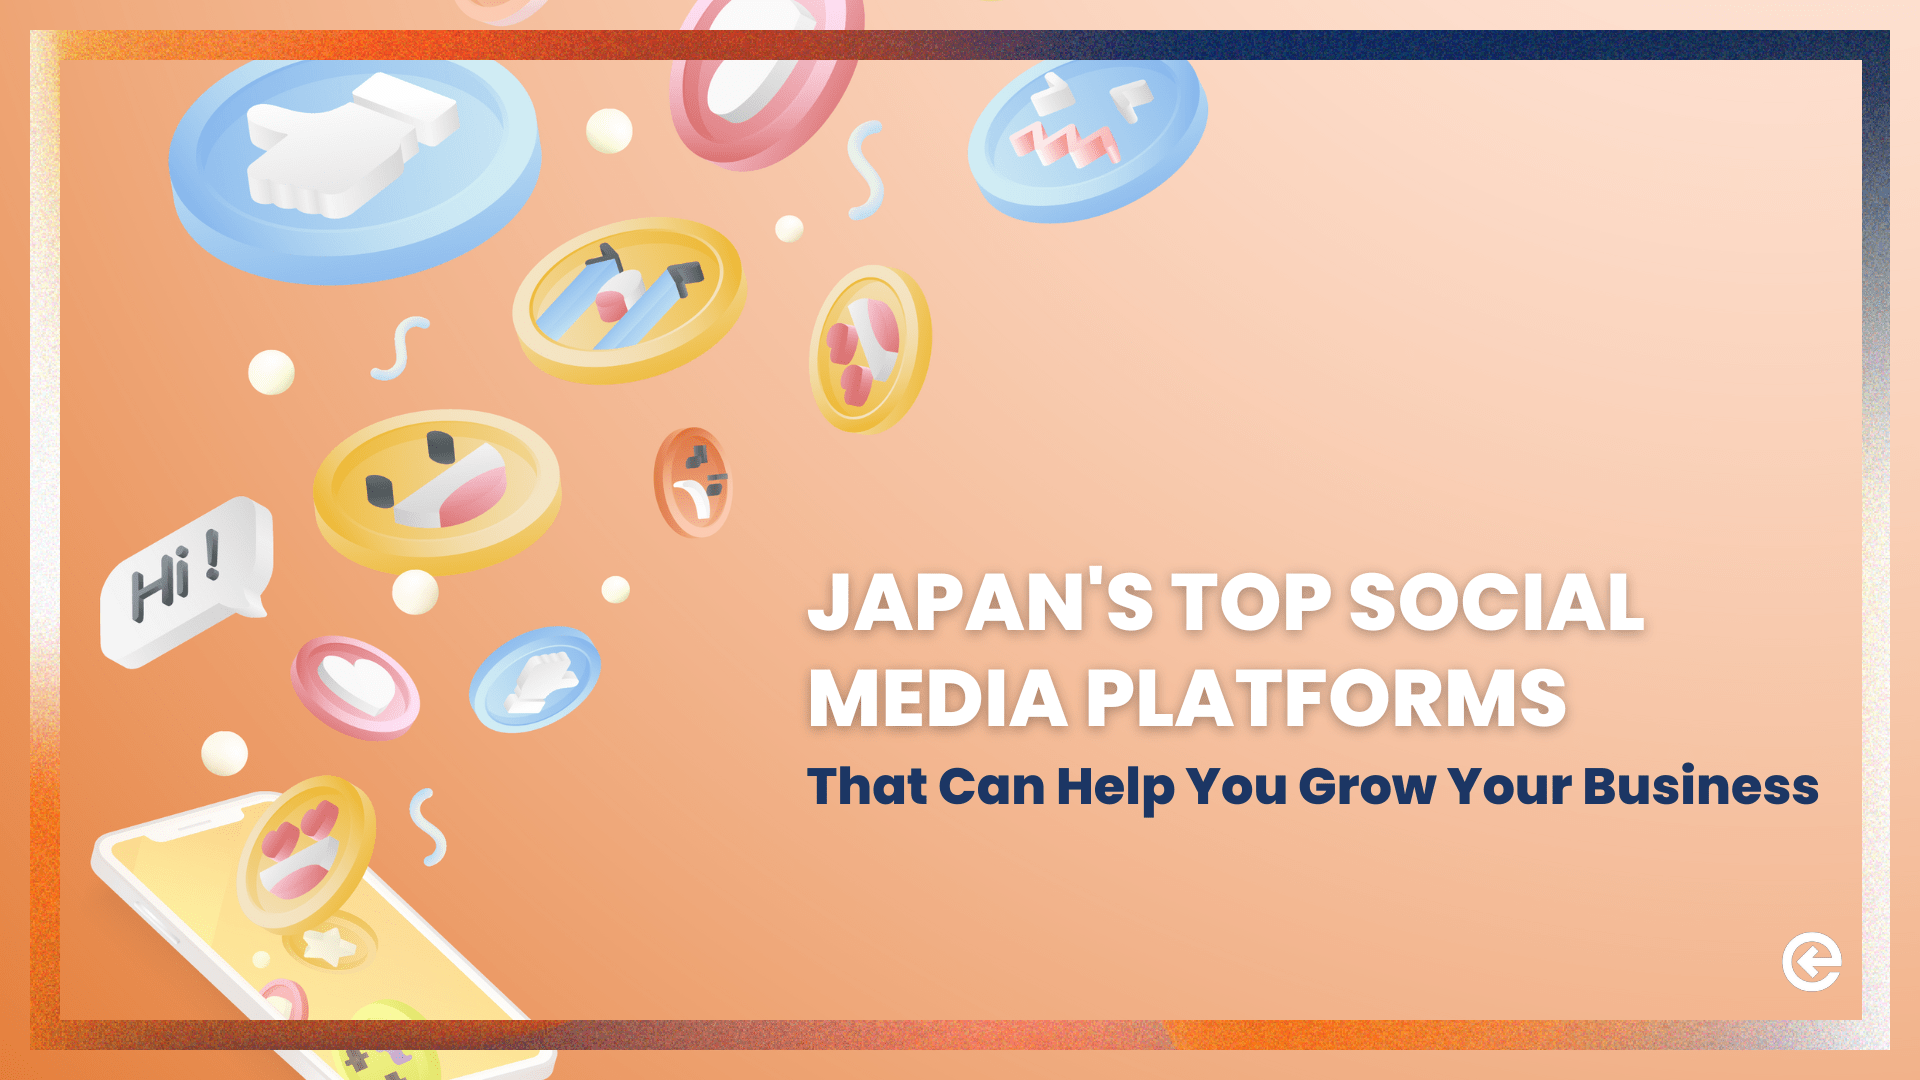 Japan’s Top Social Media Platforms That Can Help You Grow Your Brand